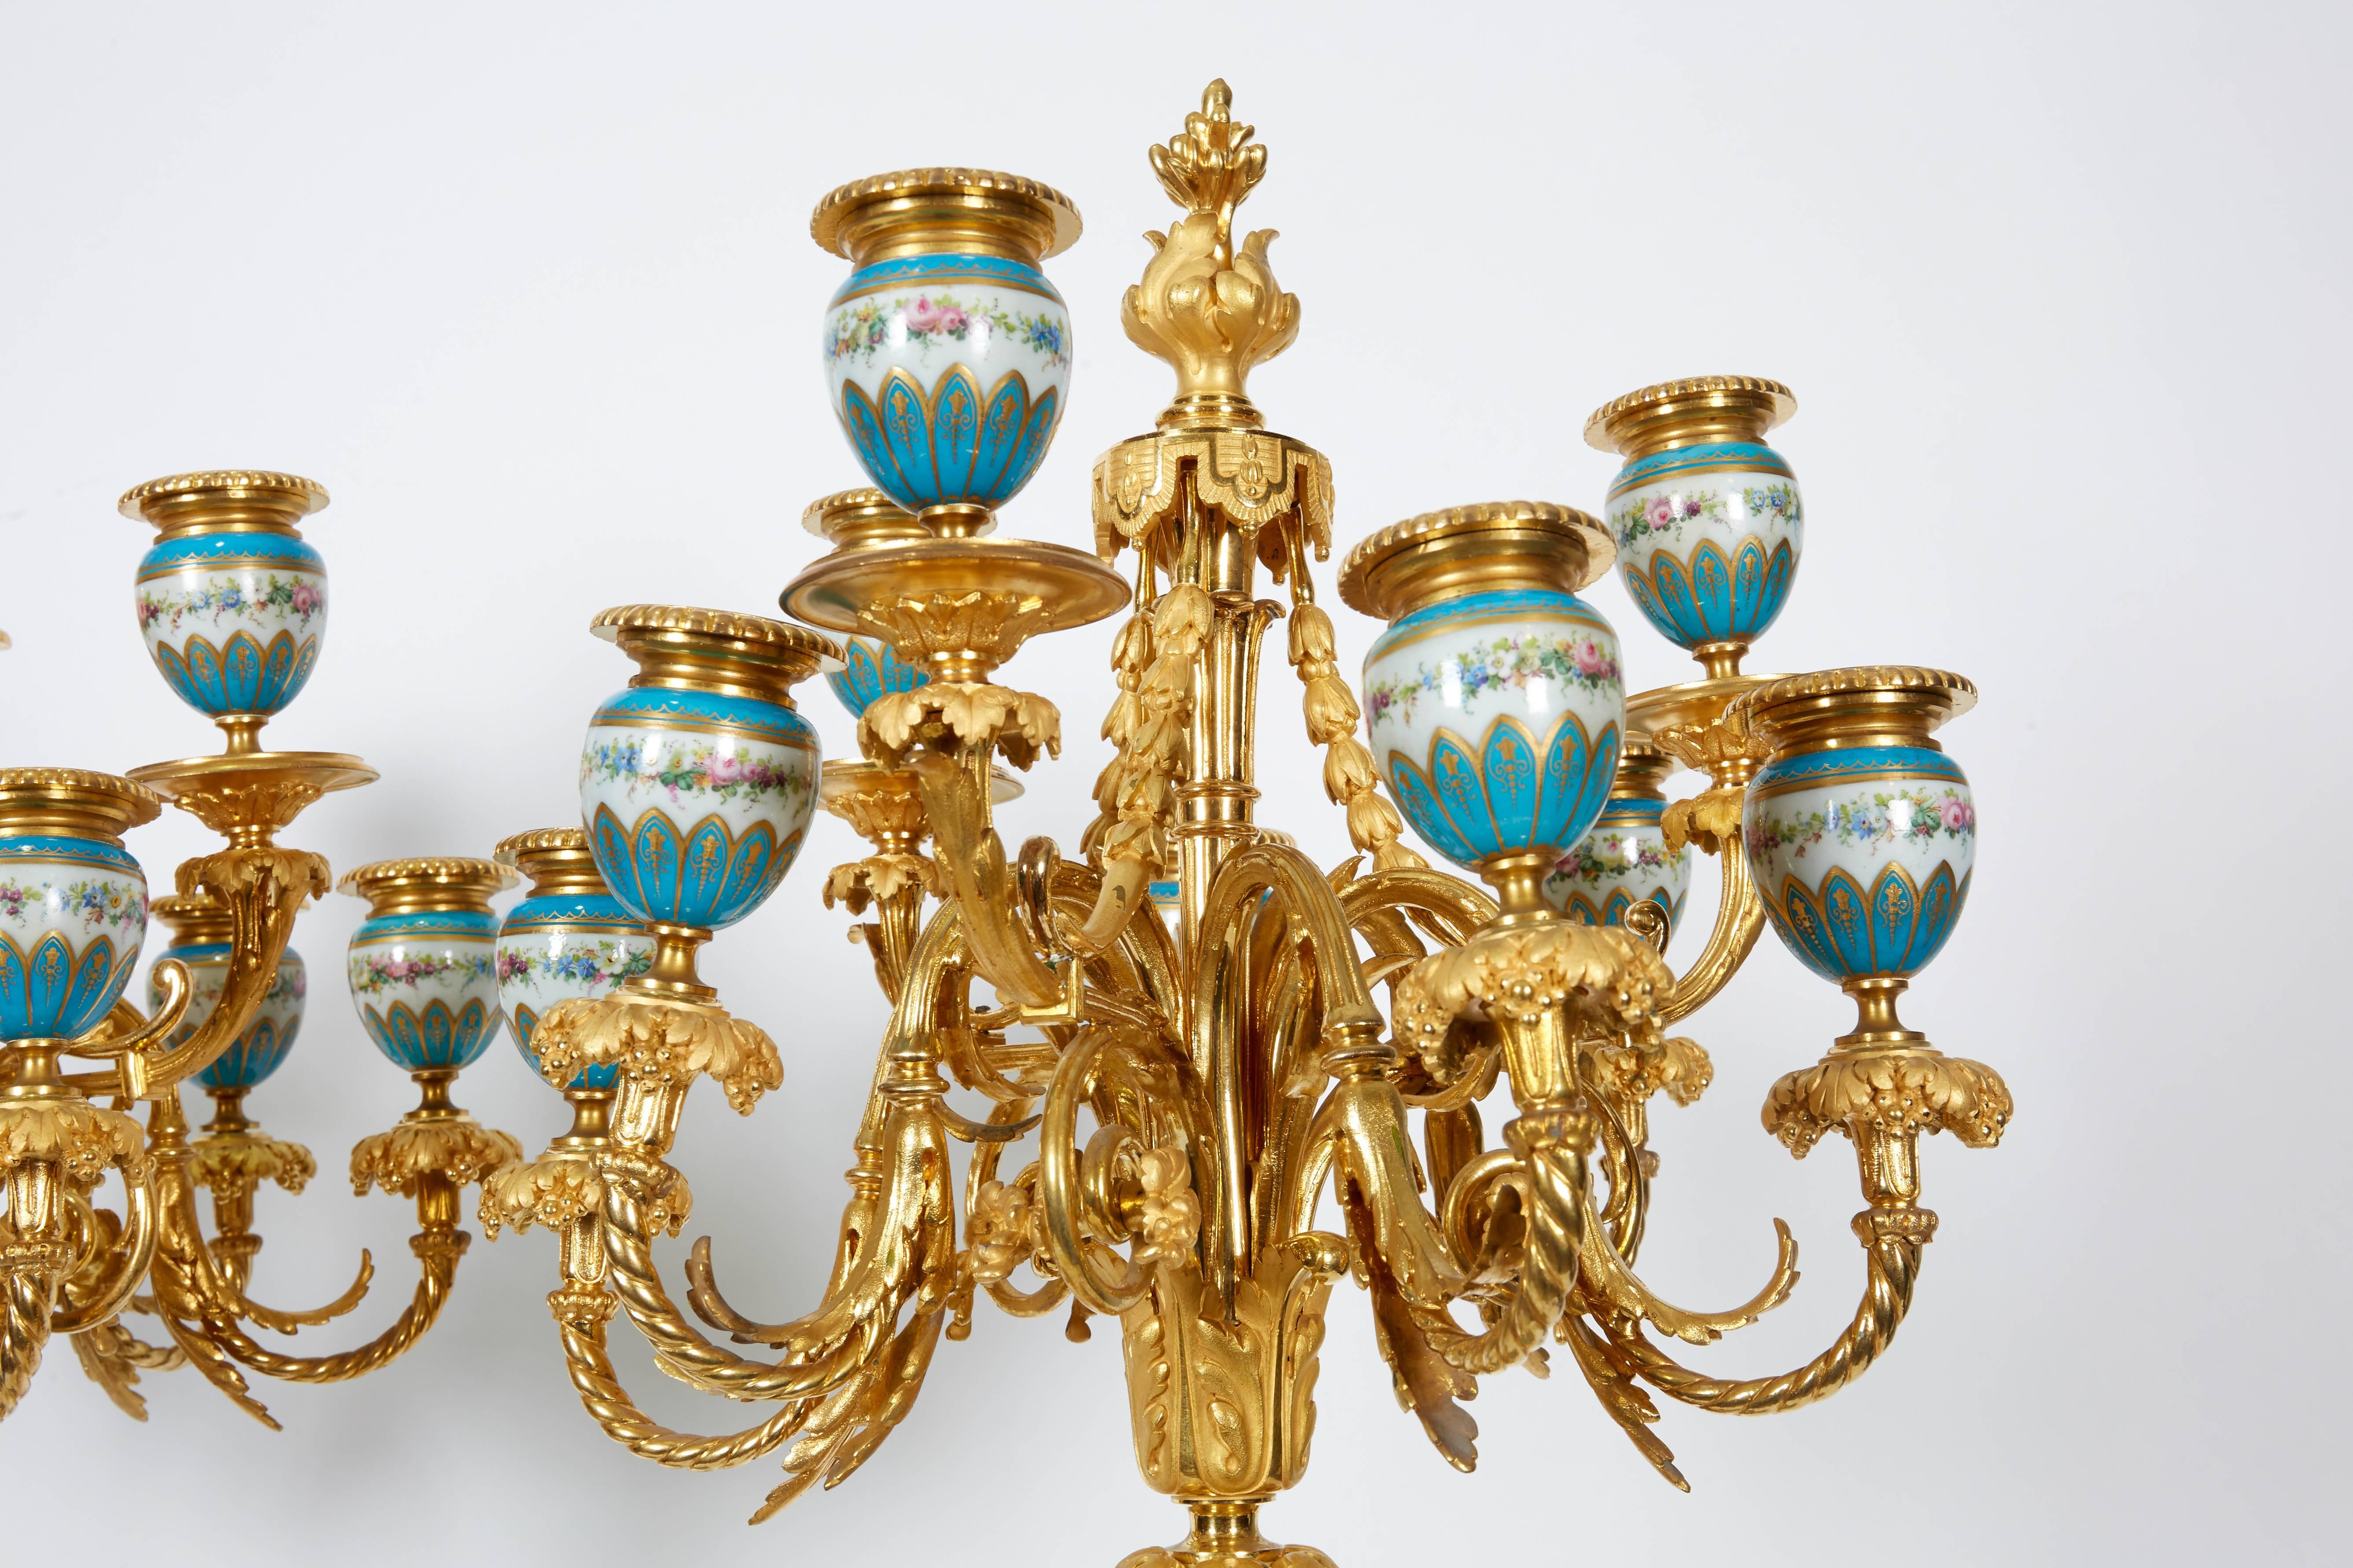 Exquisite Pair of French Ormolu and Turquoise Sevres Porcelain Candelabra 2